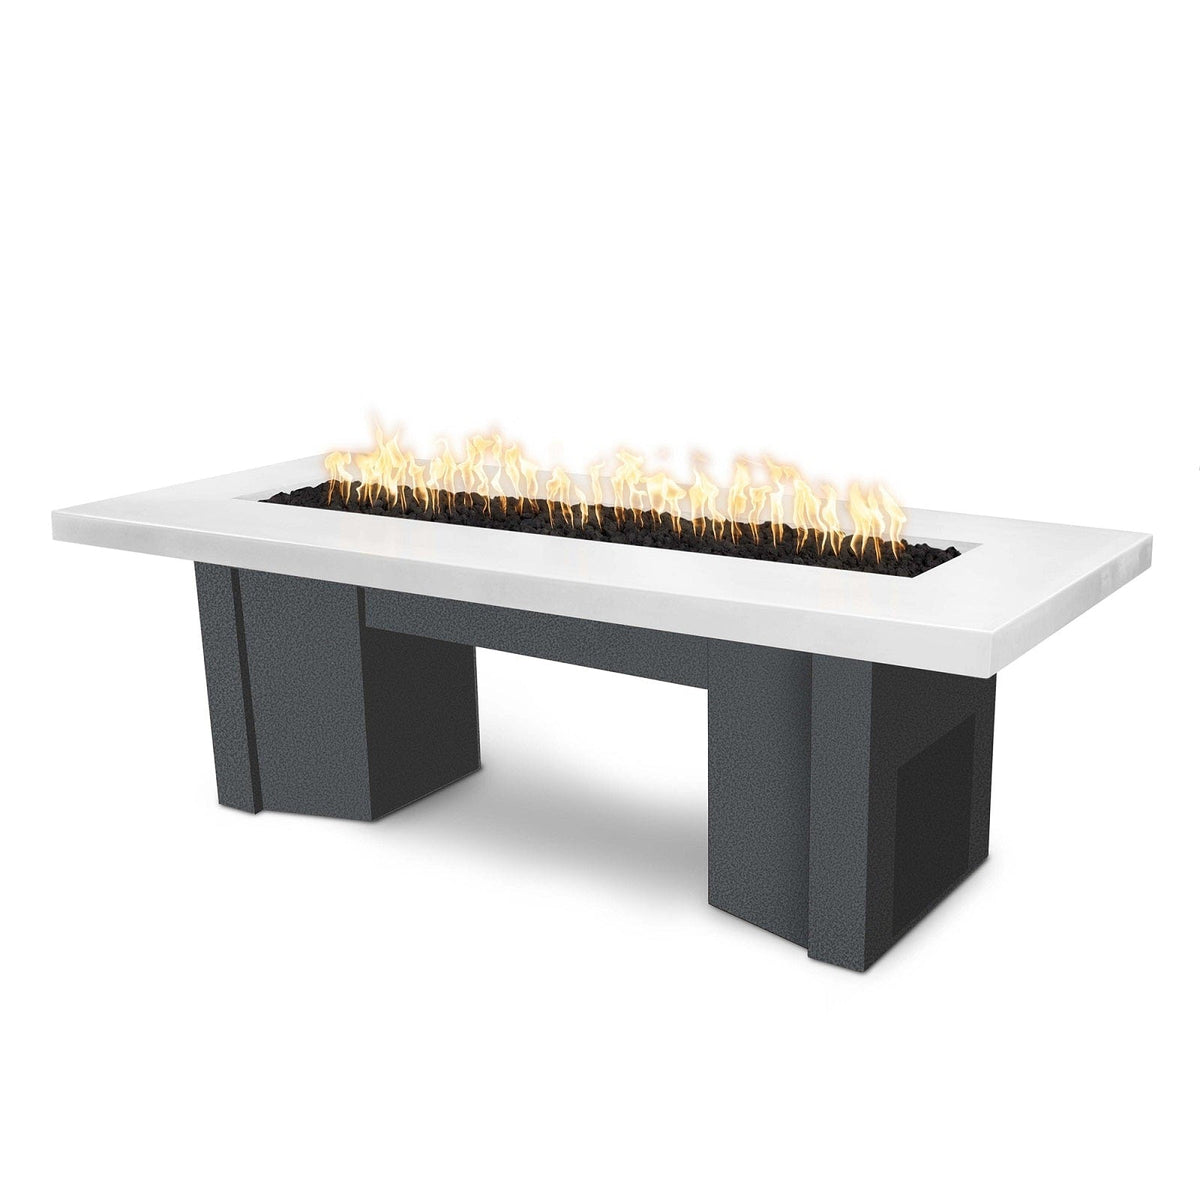 The Outdoor Plus Fire Features Limestone (-LIM) / Silver Vein Powder Coated Steel (-SLV) The Outdoor Plus 78&quot; Alameda Fire Table Smooth Concrete in Natural Gas - Flame Sense System with Push Button Spark Igniter / OPT-ALMGFRC78FSEN-NG